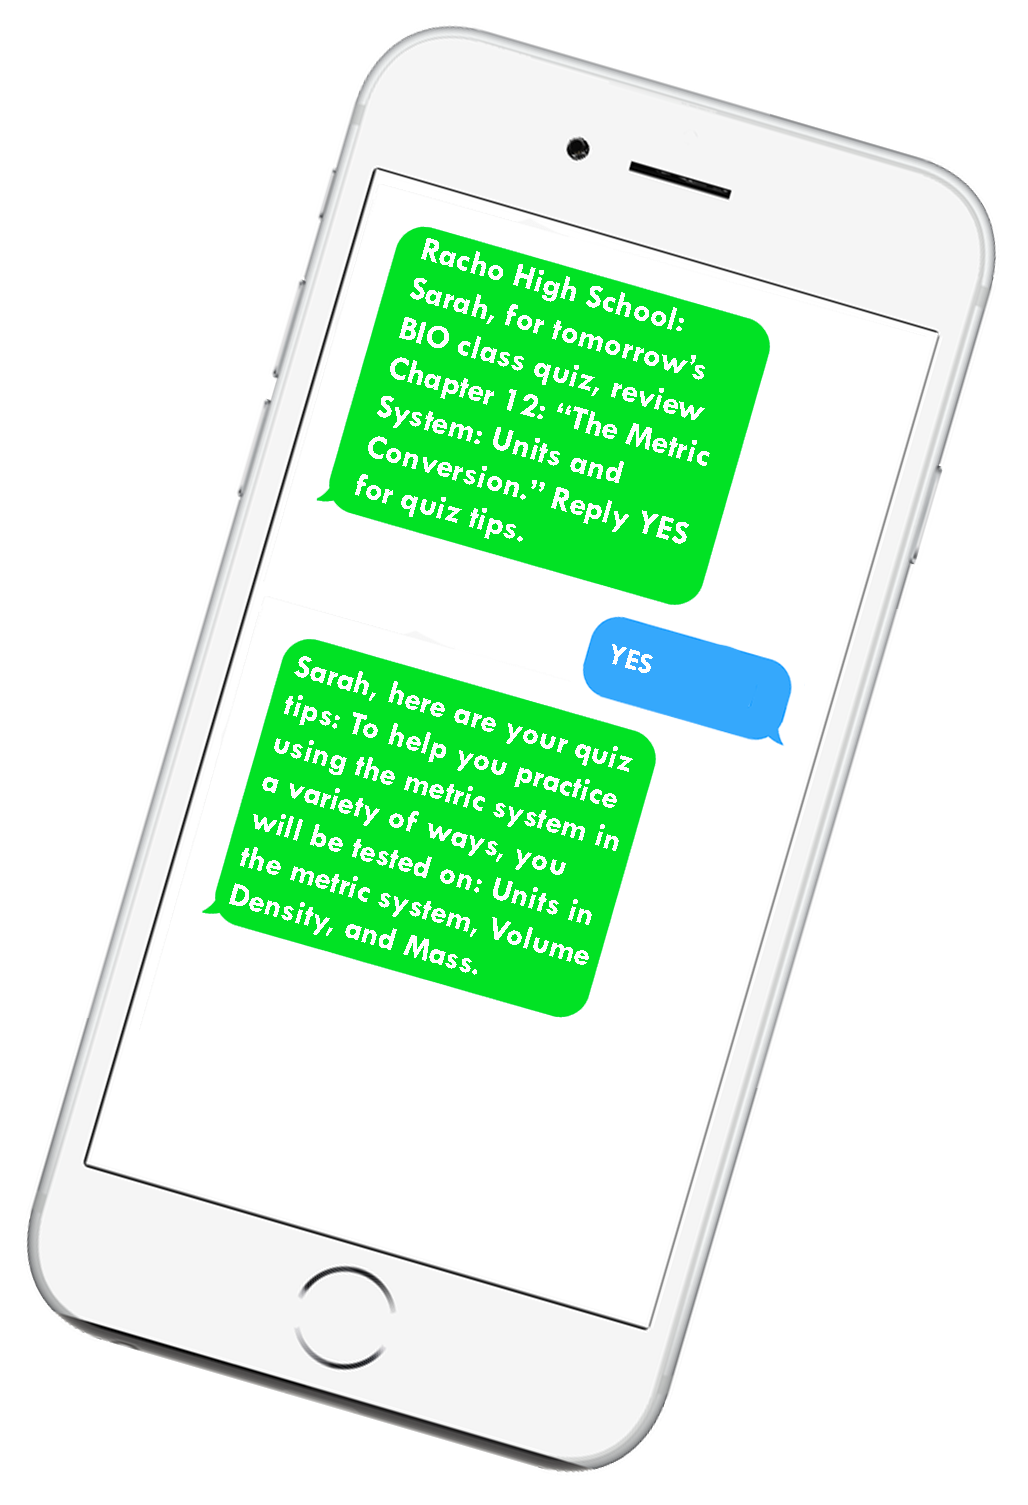 School SMS Texting and Mobile Messaging K12 and Higher Ed